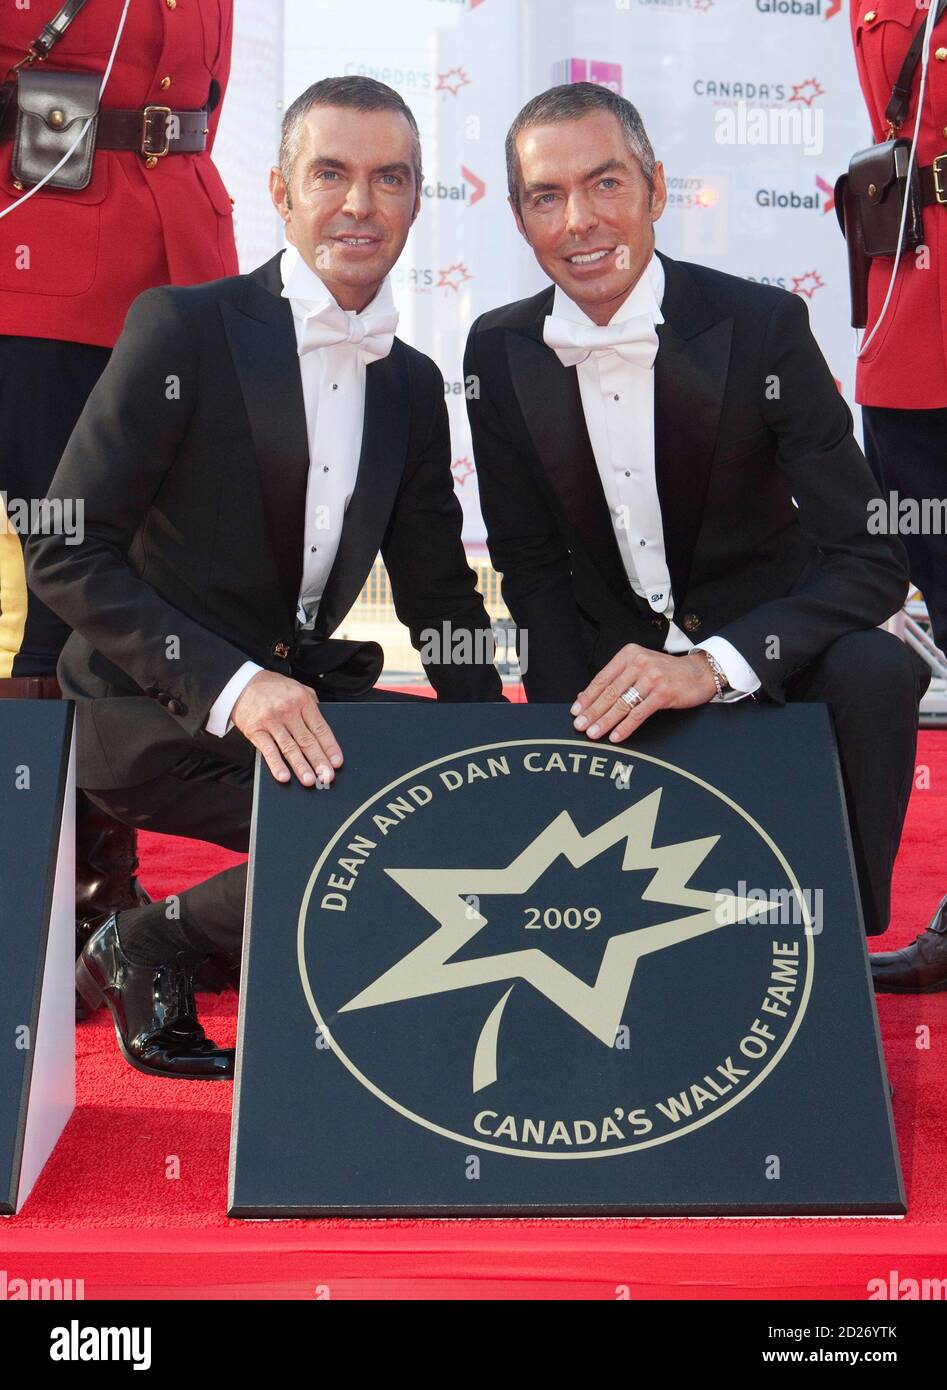 Fashion designers and twin brothers Dean and Dan Caten, also known as  Dsquared, pose with their star during the 12th annual Canada's Walk of Fame  inductee ceremony in Toronto, September 12, 2009.